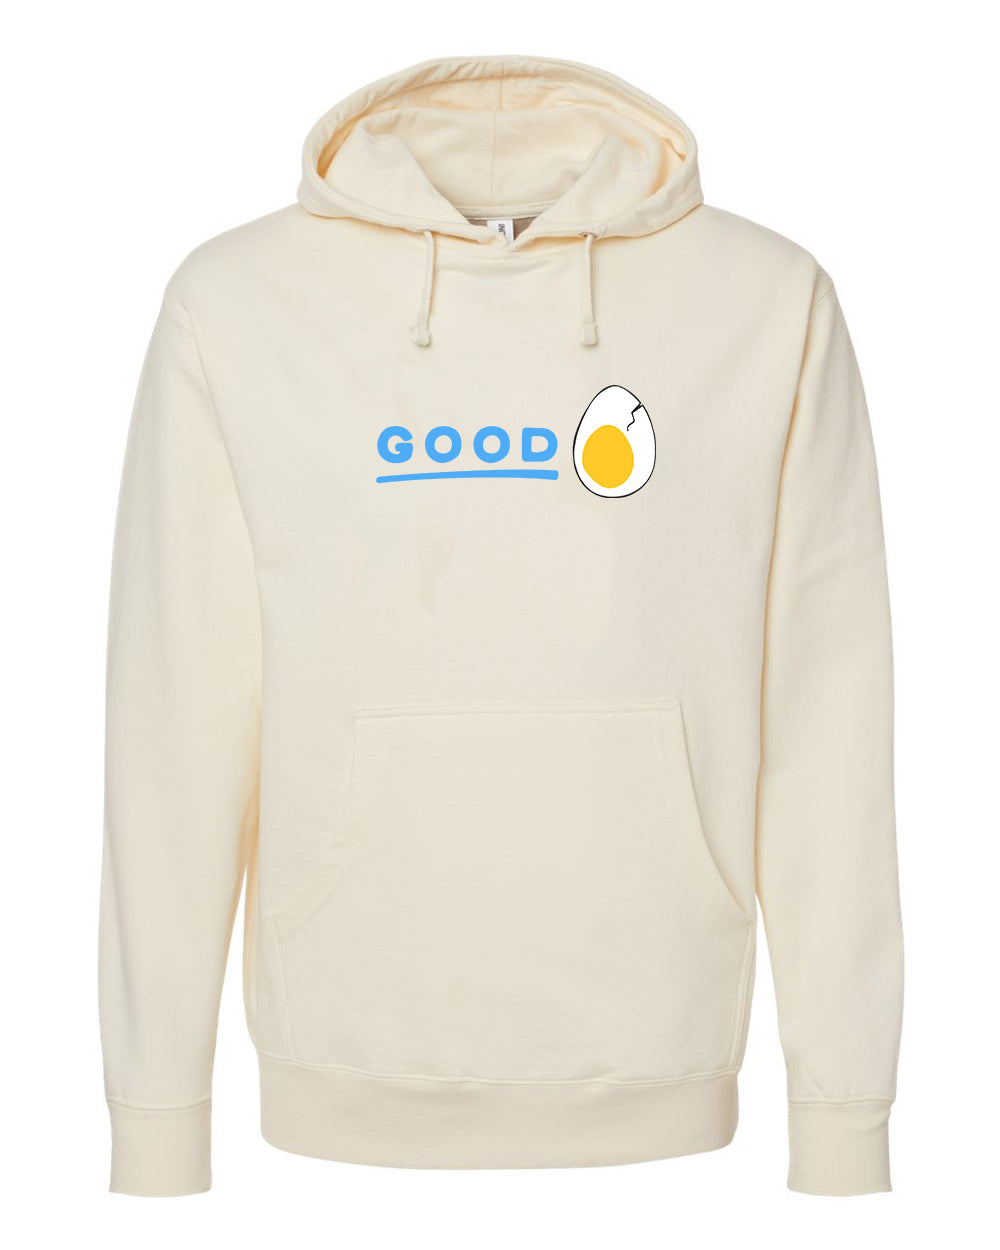 Cracked Goodness, Good Egg Unisex Hoodie by Seen Not Seen